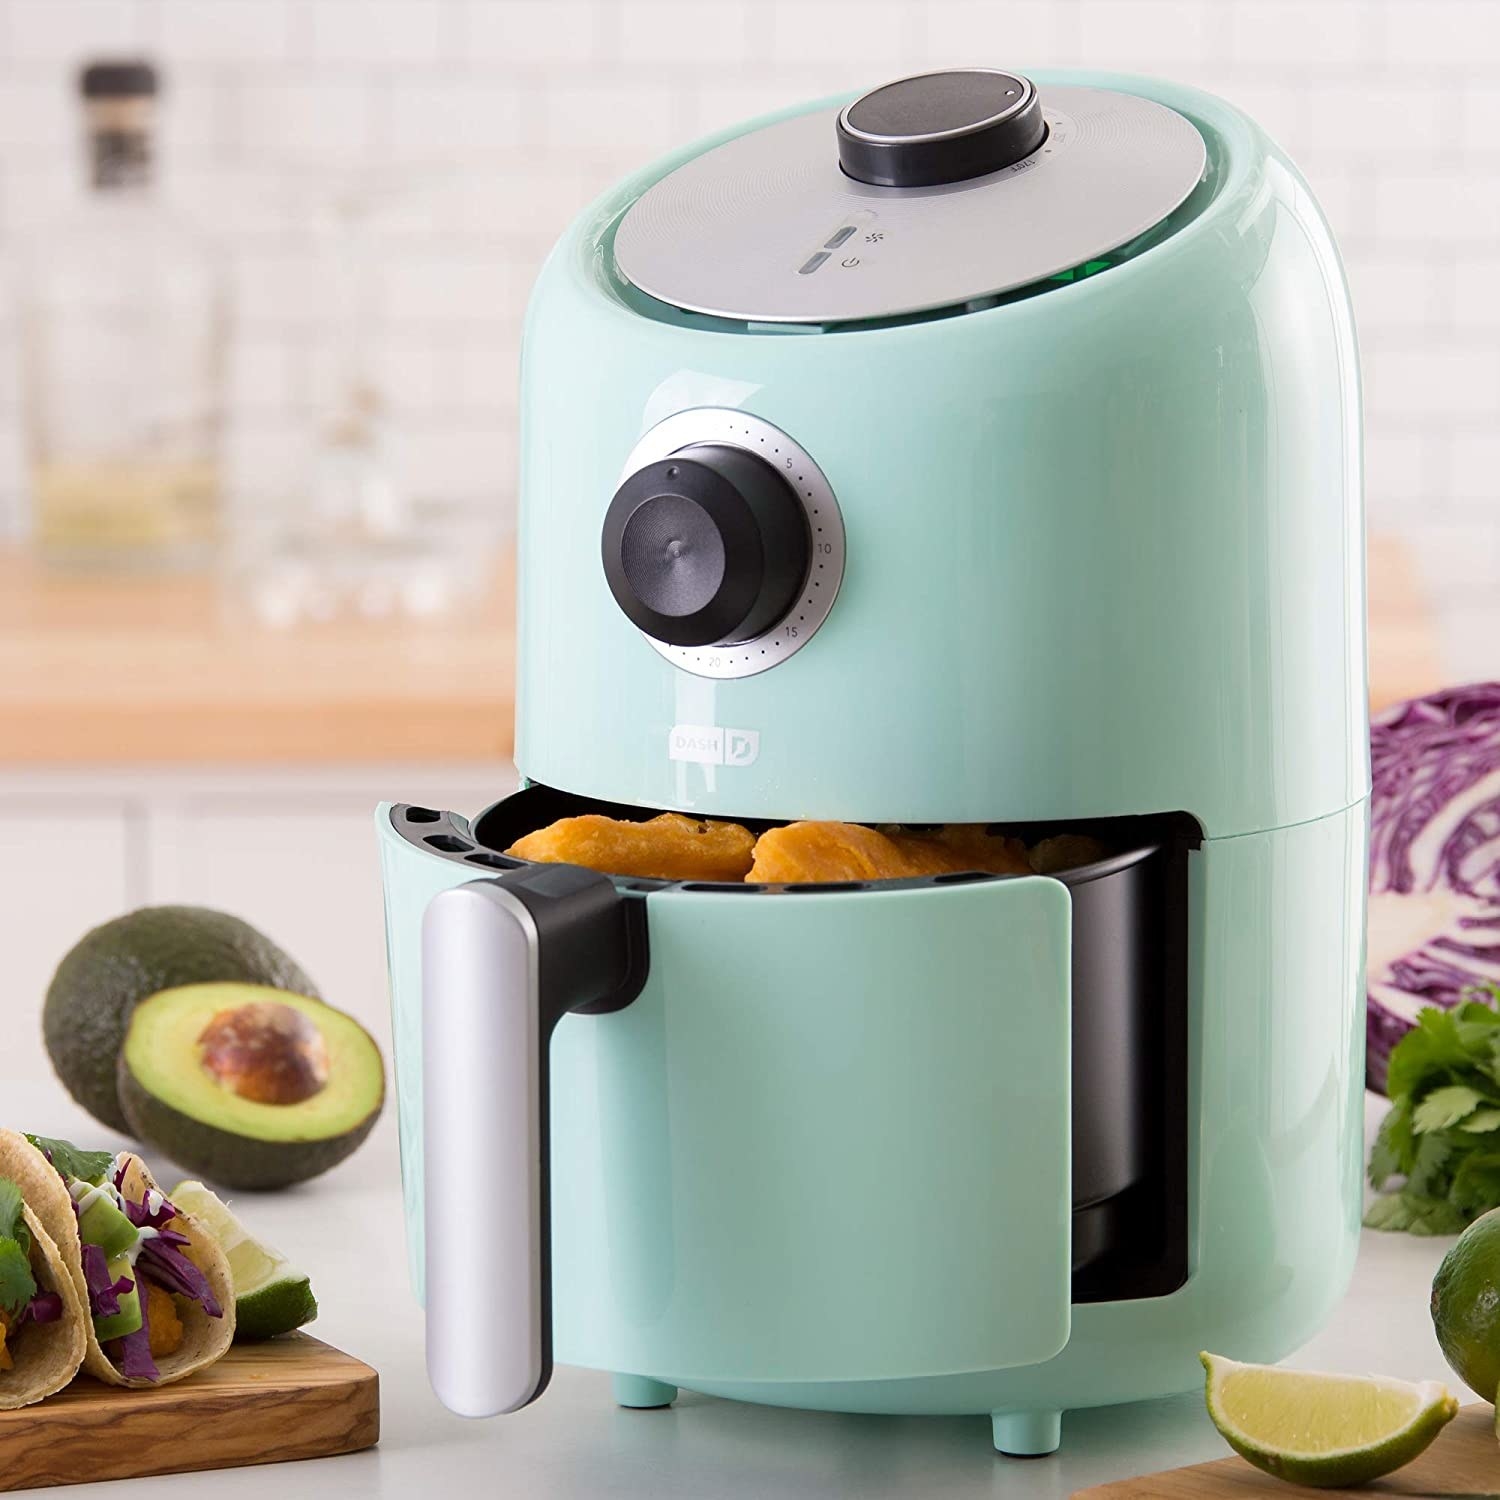 A small air fryer on a kitchen countertop